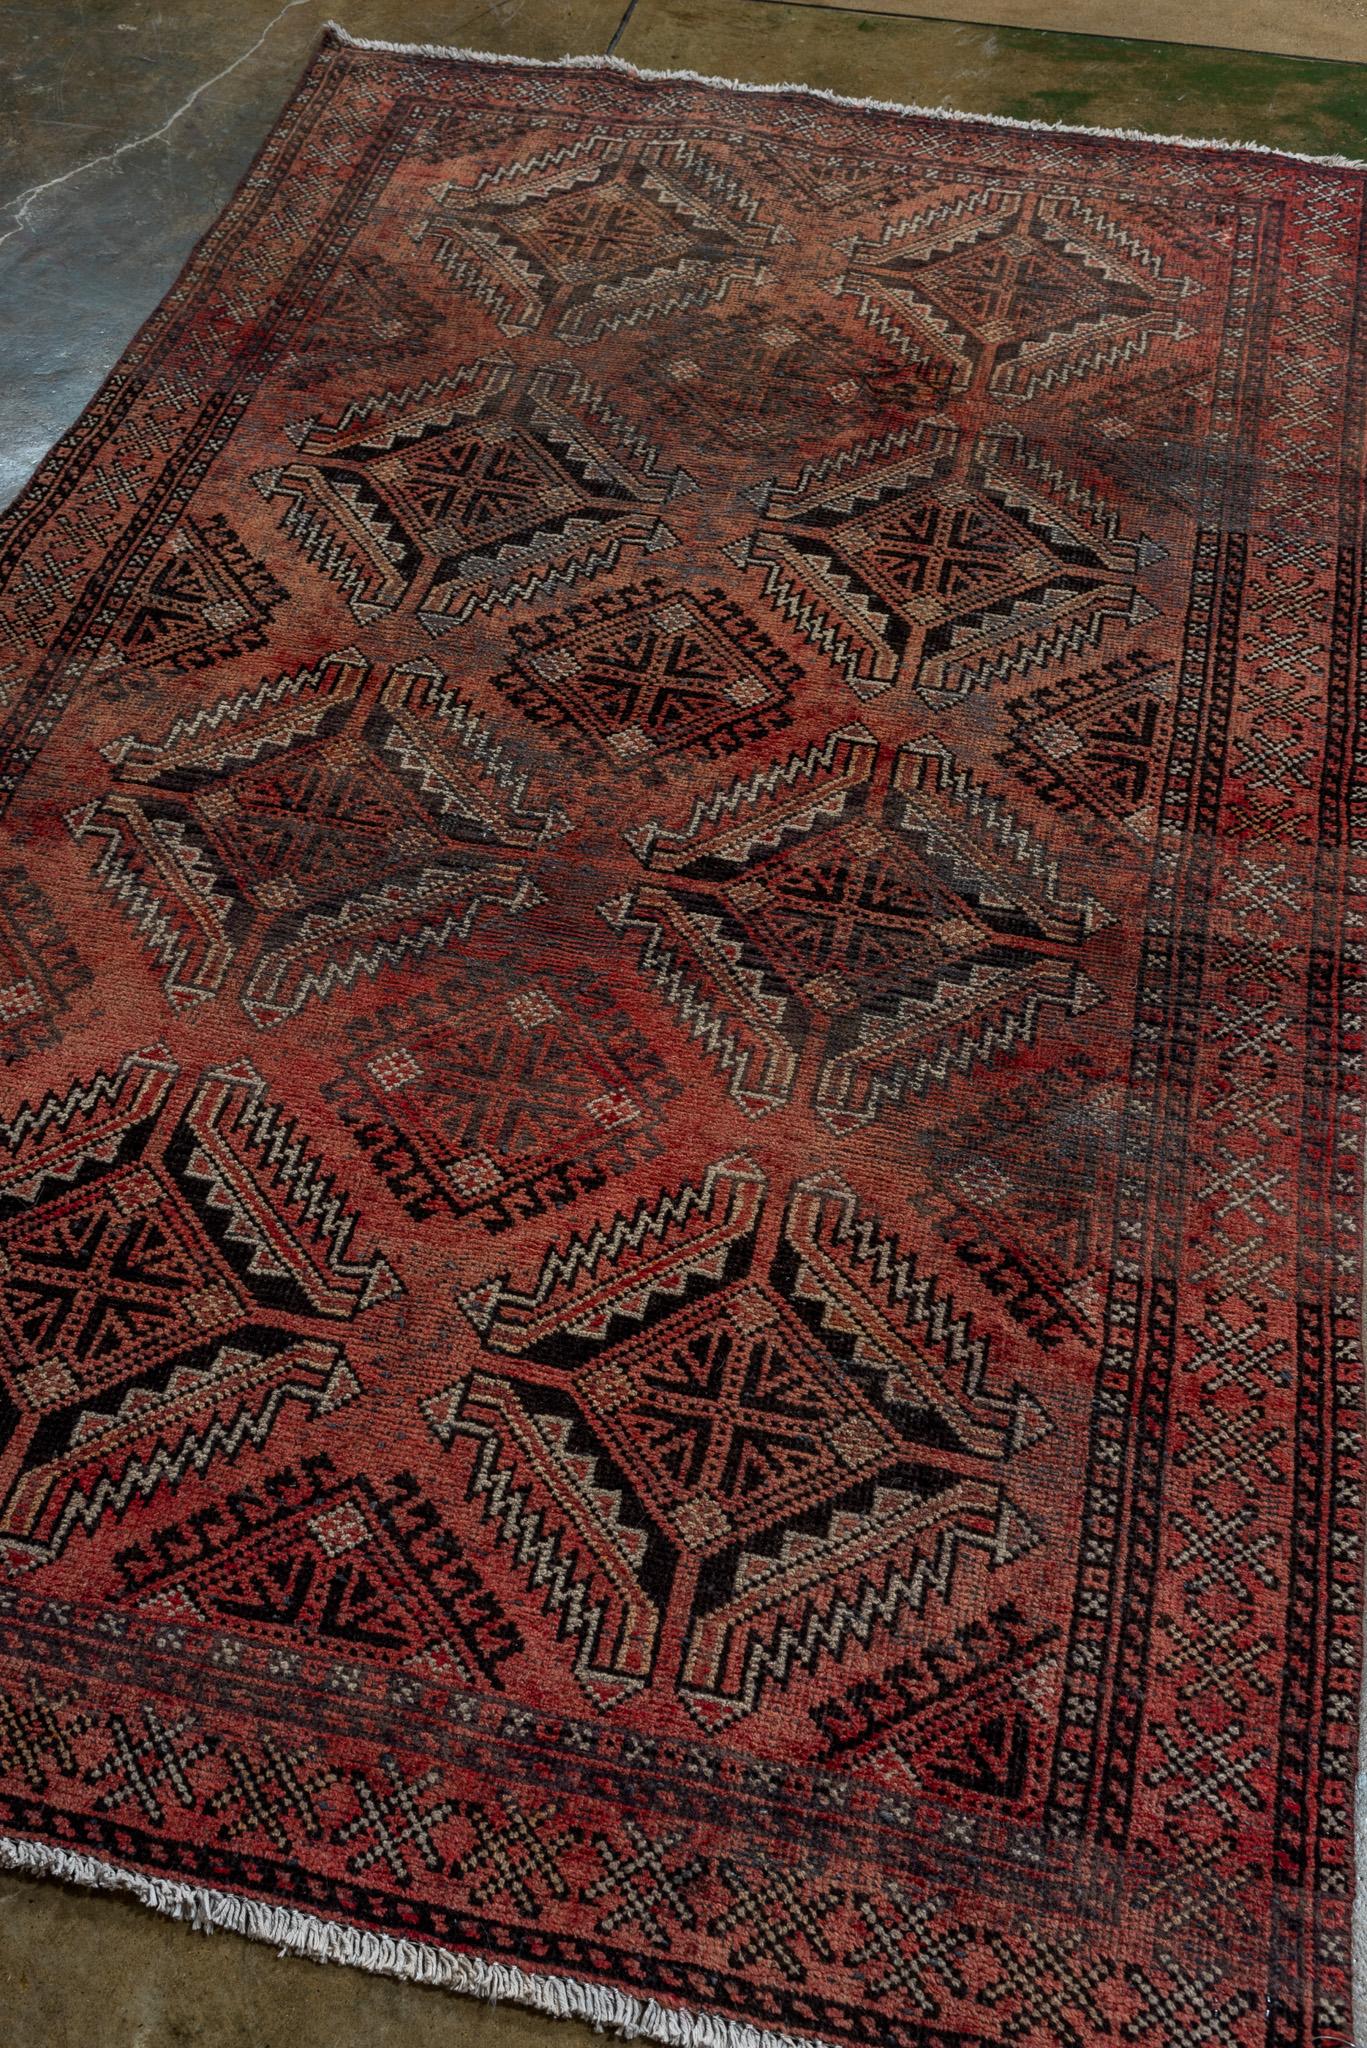 A Belouch Rug circa 1940. Handknotted with 100% wool yarn.